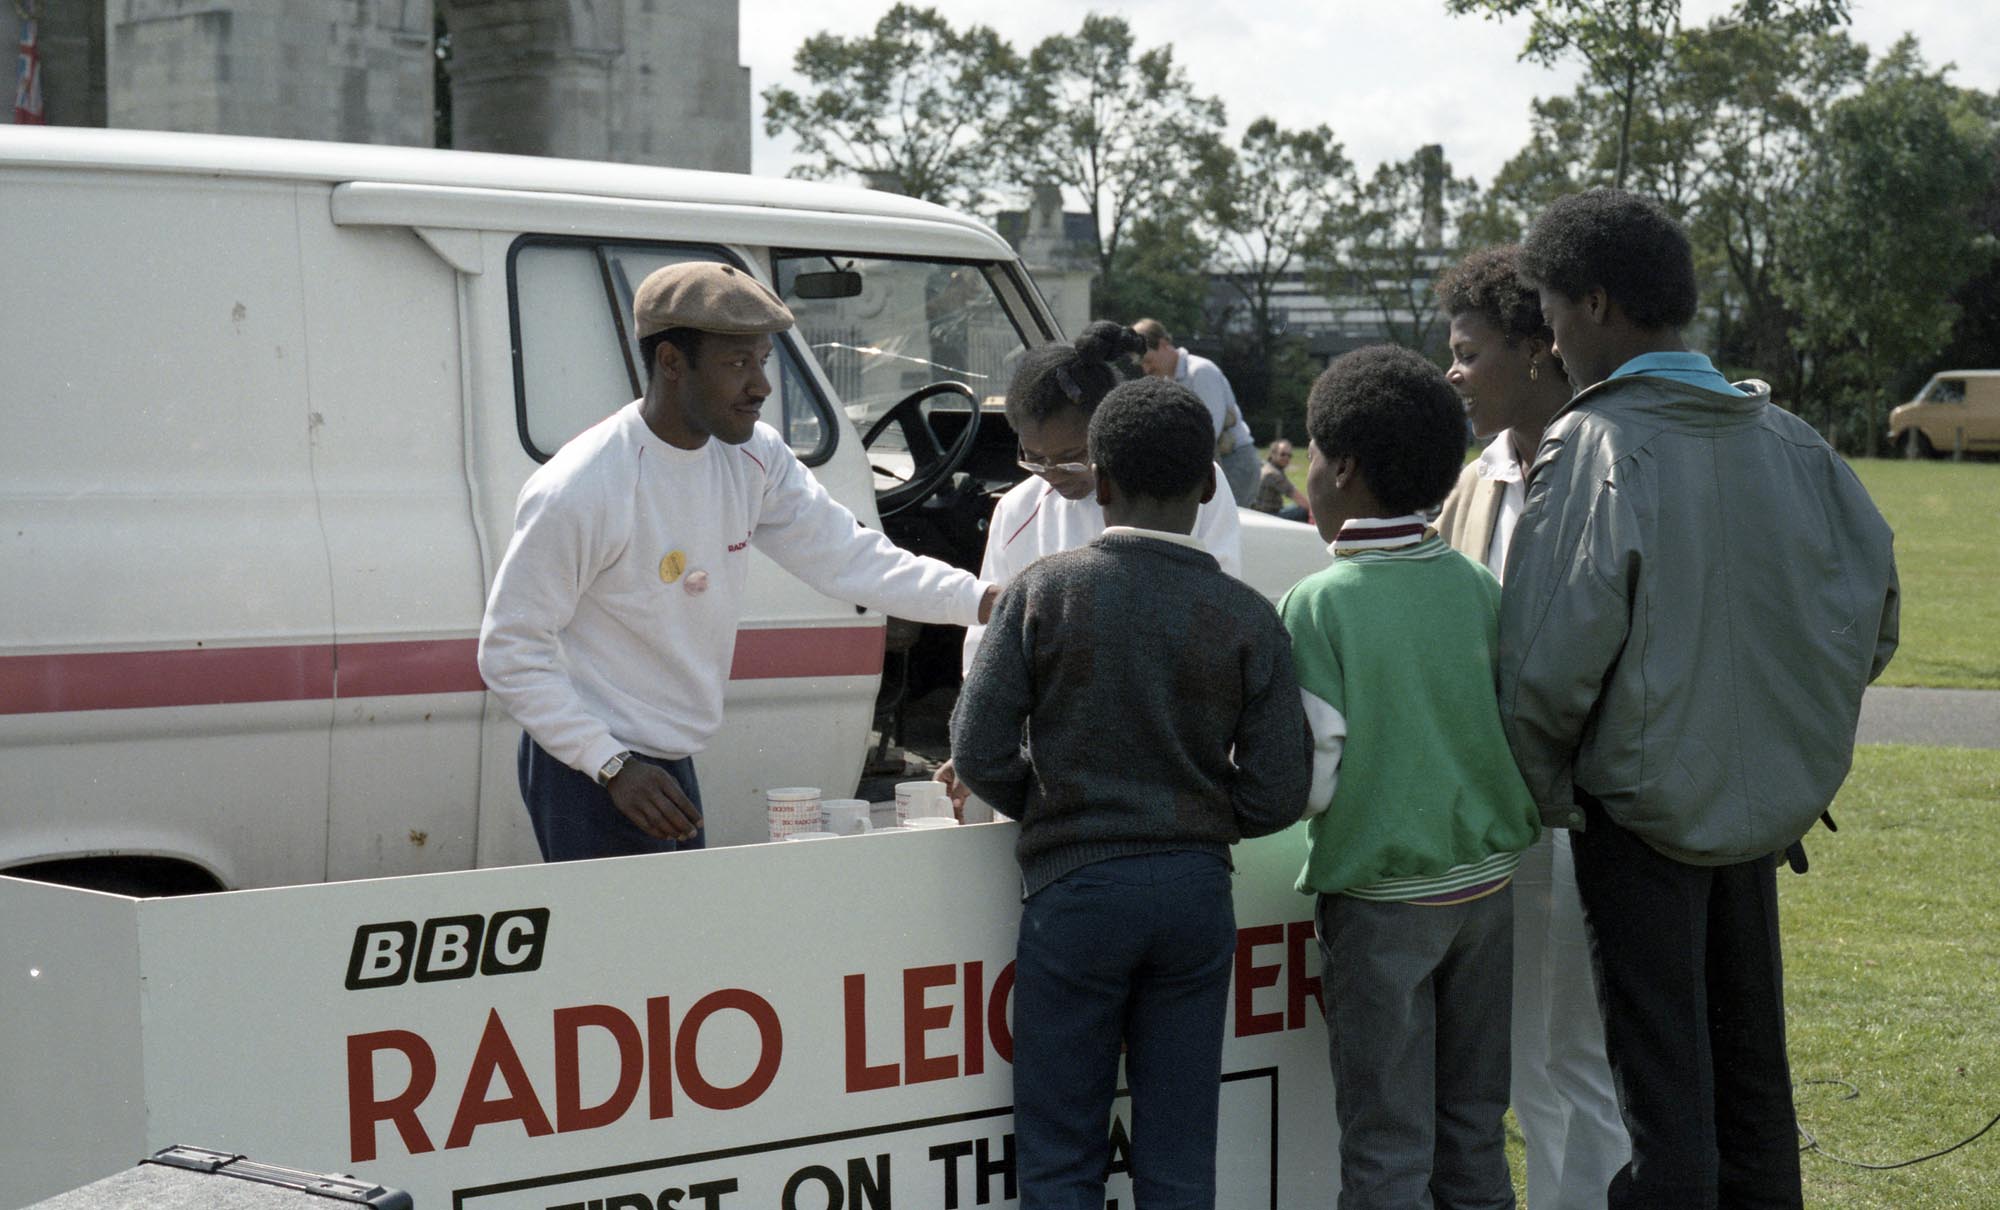 BBC Radio Leicester at the Carnival Village in 1986 -